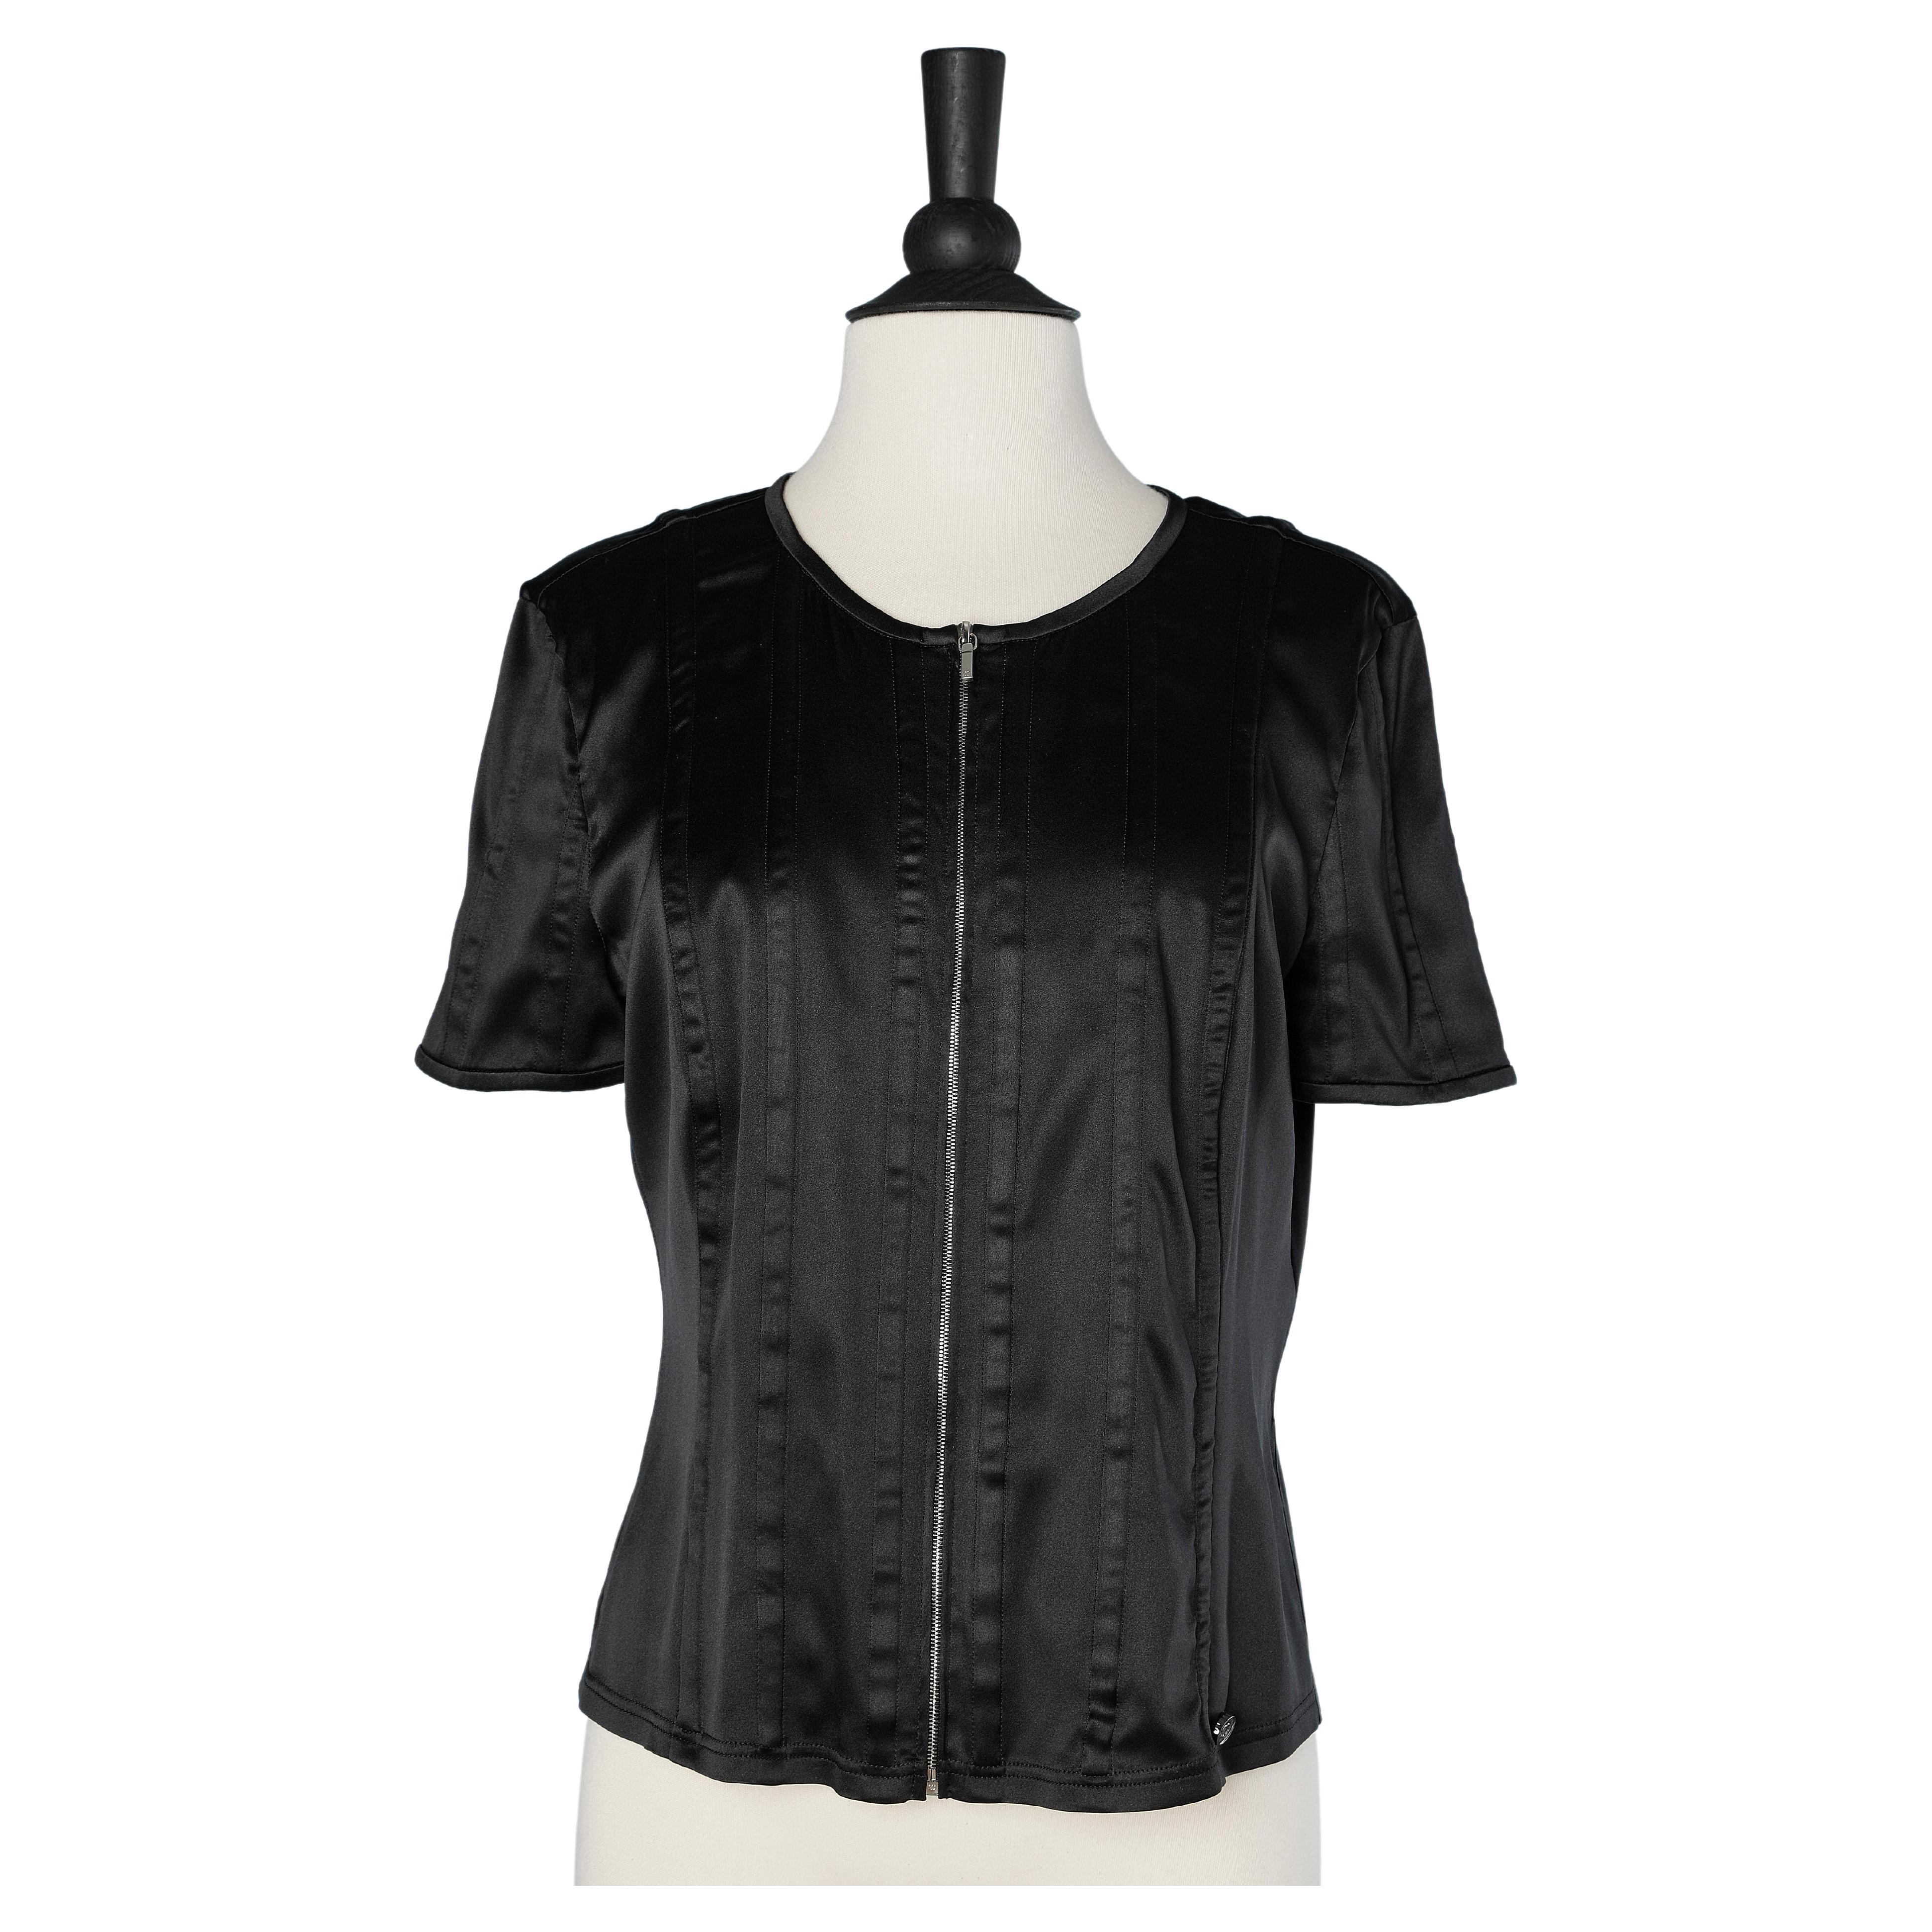 Black silk top with zip in the front and quilted top-stitched strips Chanel